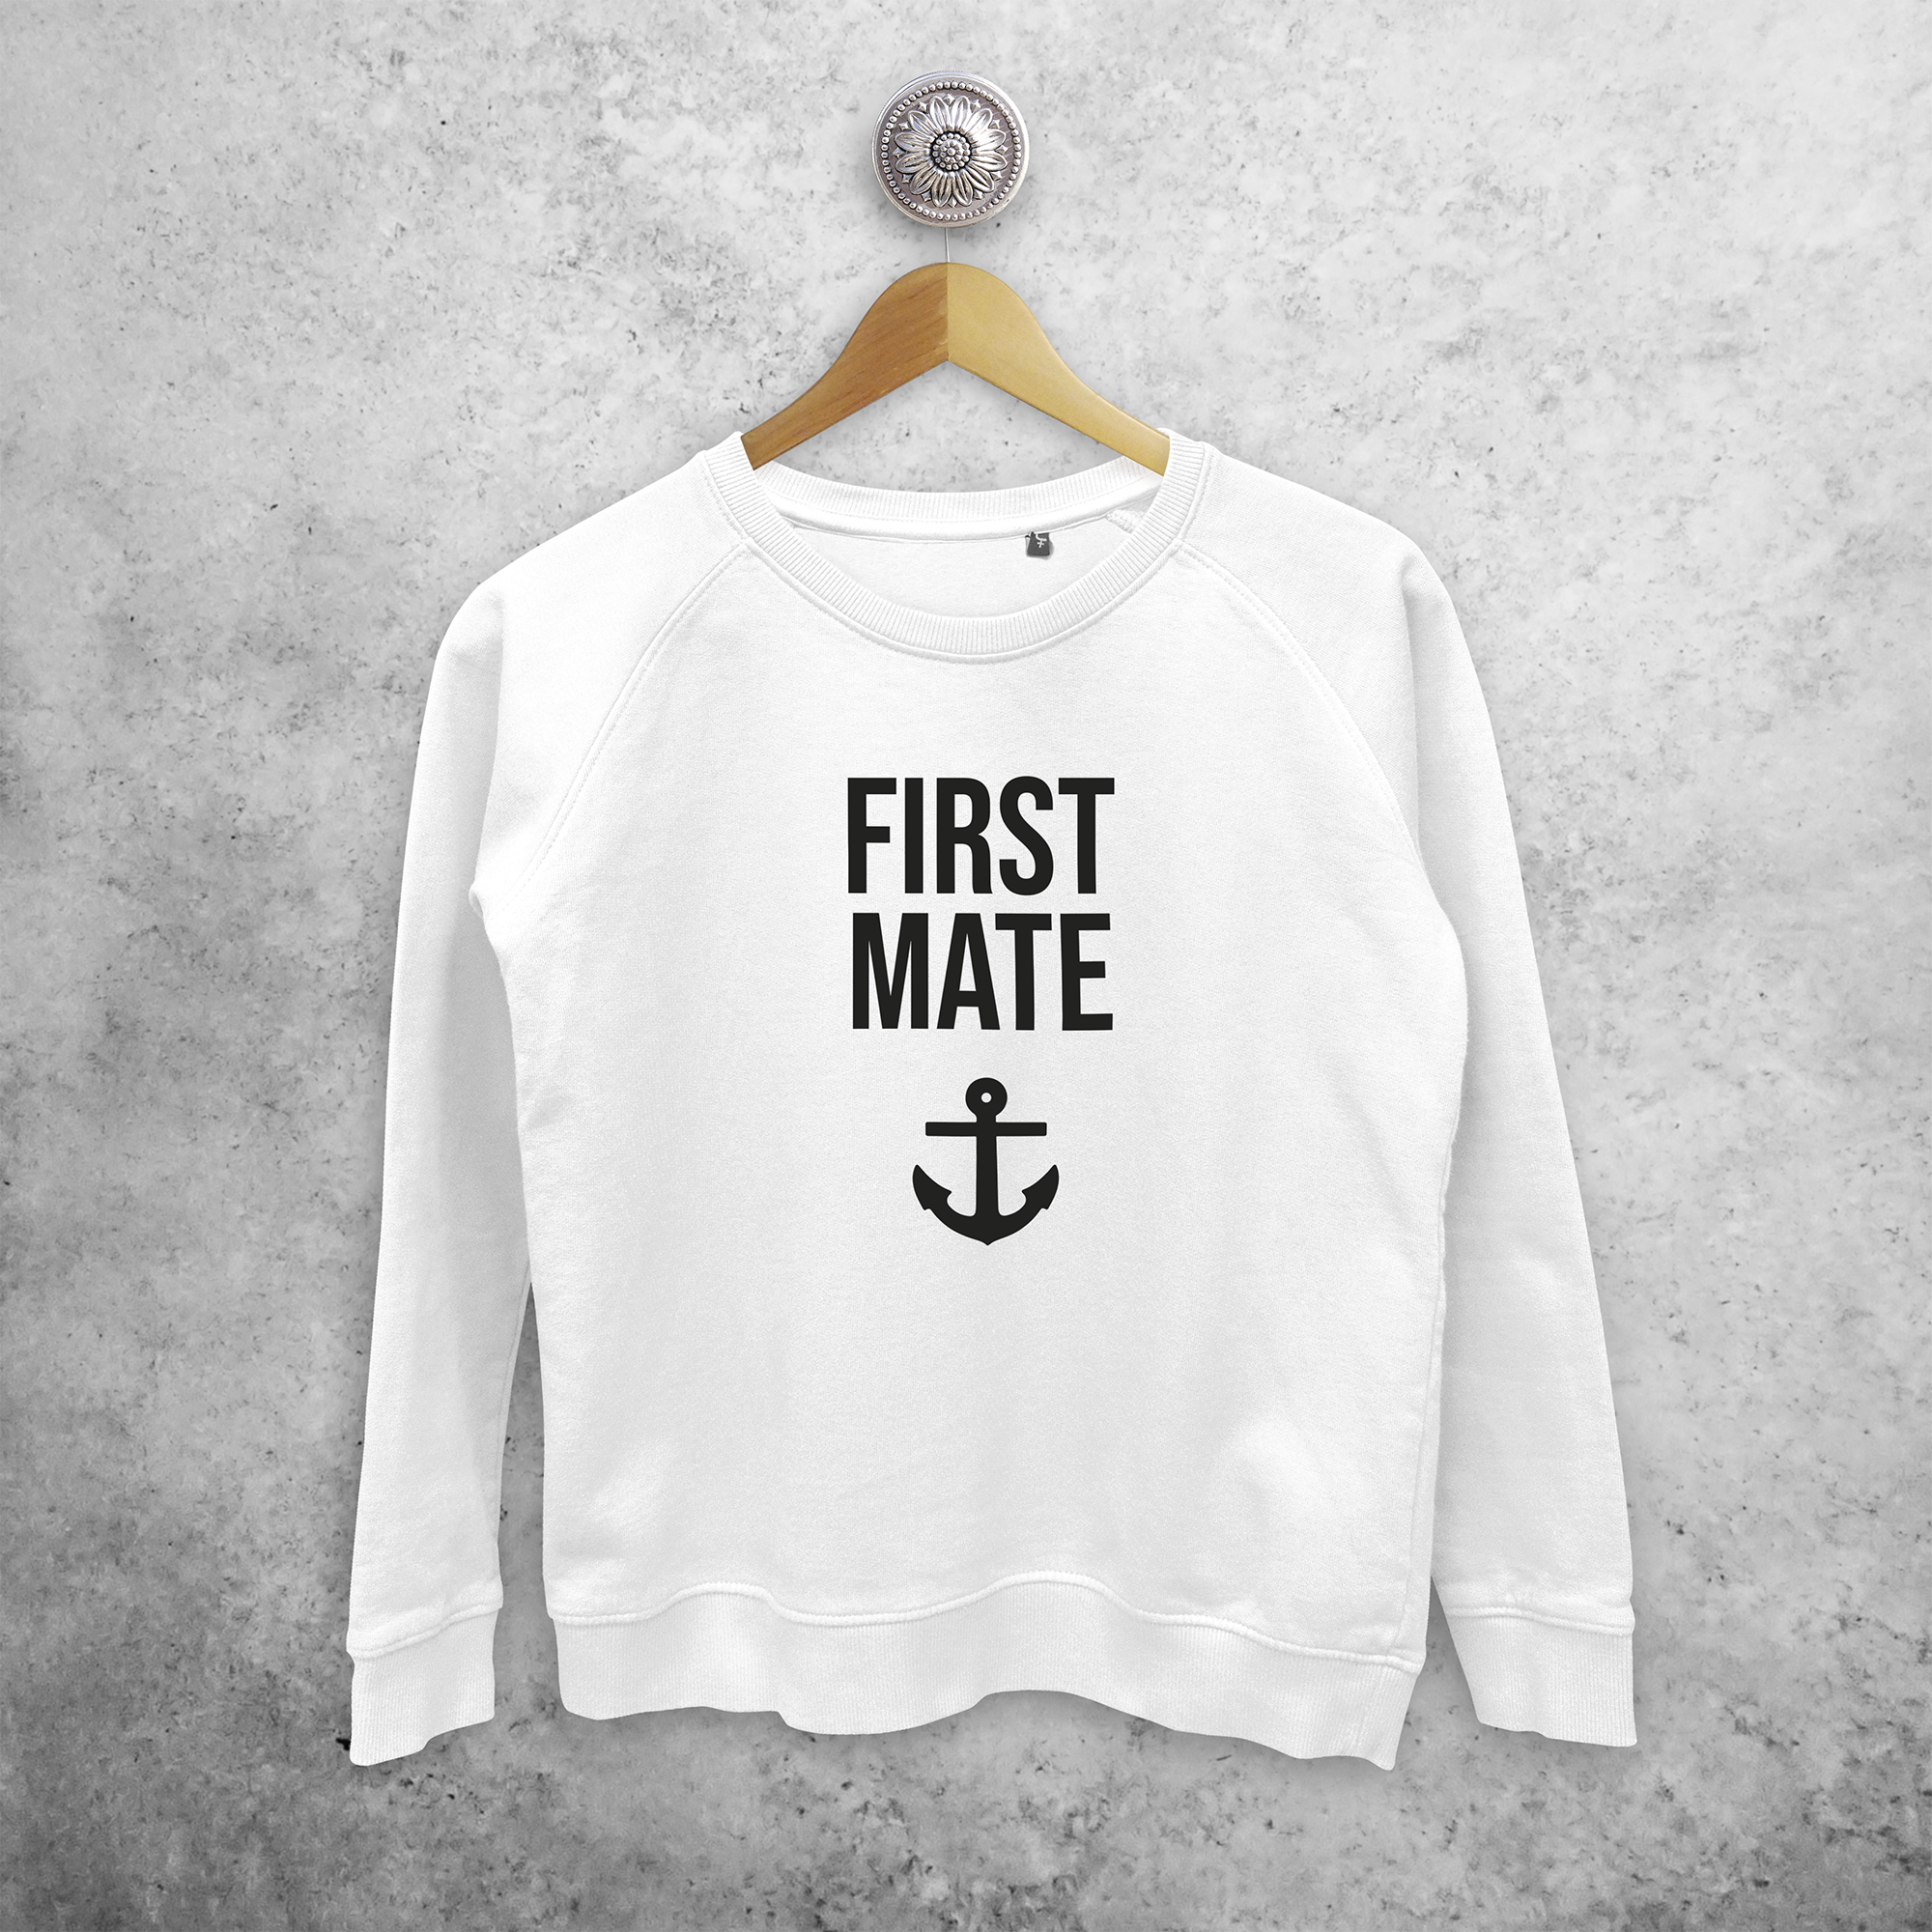 'First mate' sweater